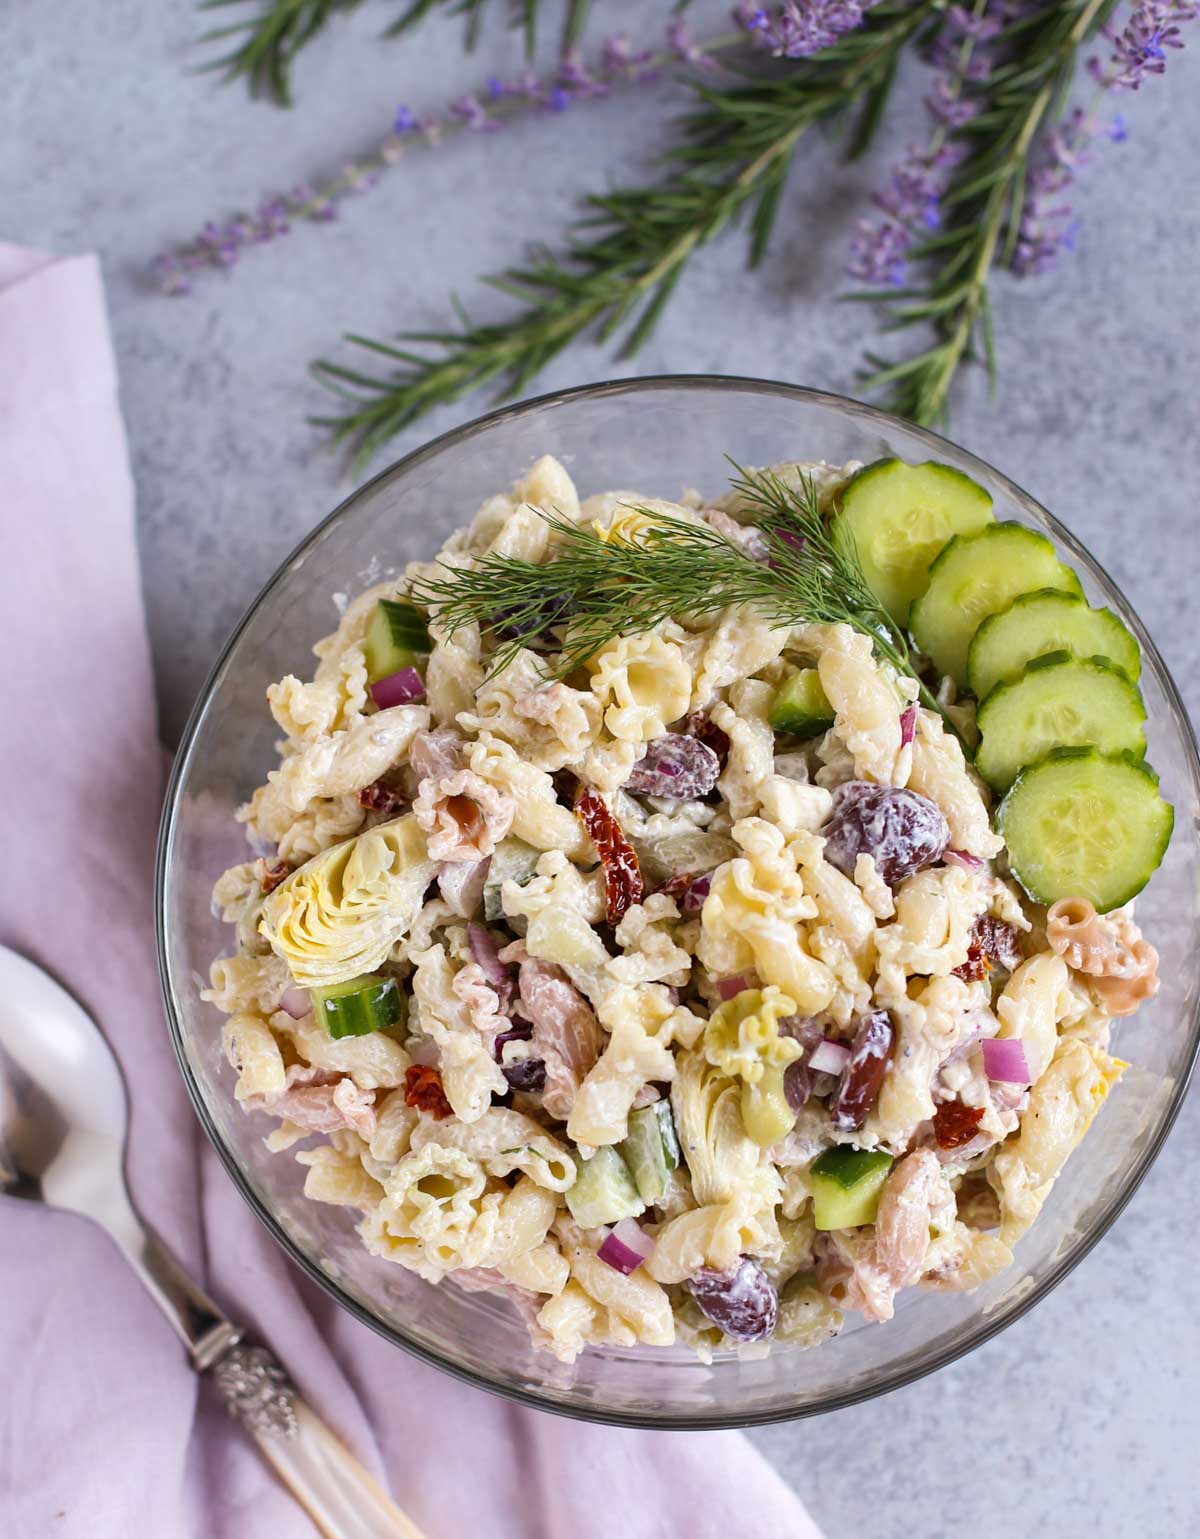 Tzatziki Pasta Salad | Cool and tangy Tzatziki Pasta Salad is the perfect side for a hot summer night! Artichokes, sun dried tomatoes, Kalamata olives, and crunchy cucumbers add just the right Greek flavors. Yum! Serve with grilled meats or chicken! Enjoy! | WorldofPastabilities.com